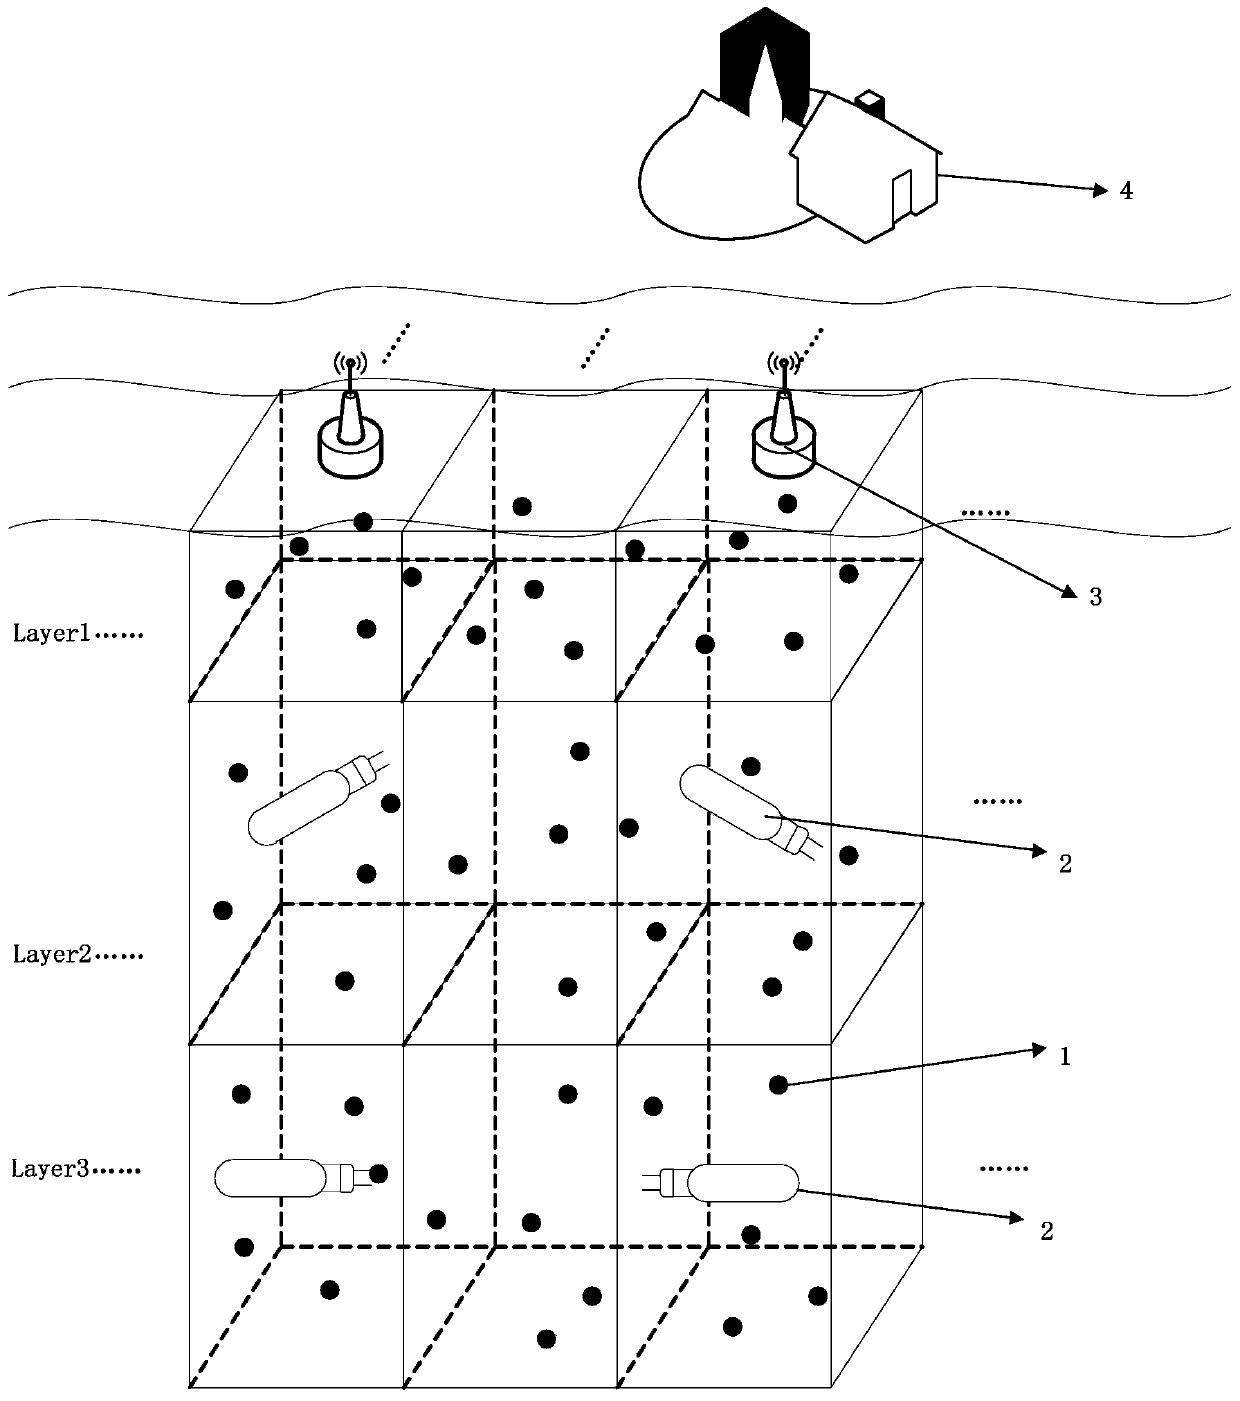 An underwater acoustic sensor network and its node deployment and networking method